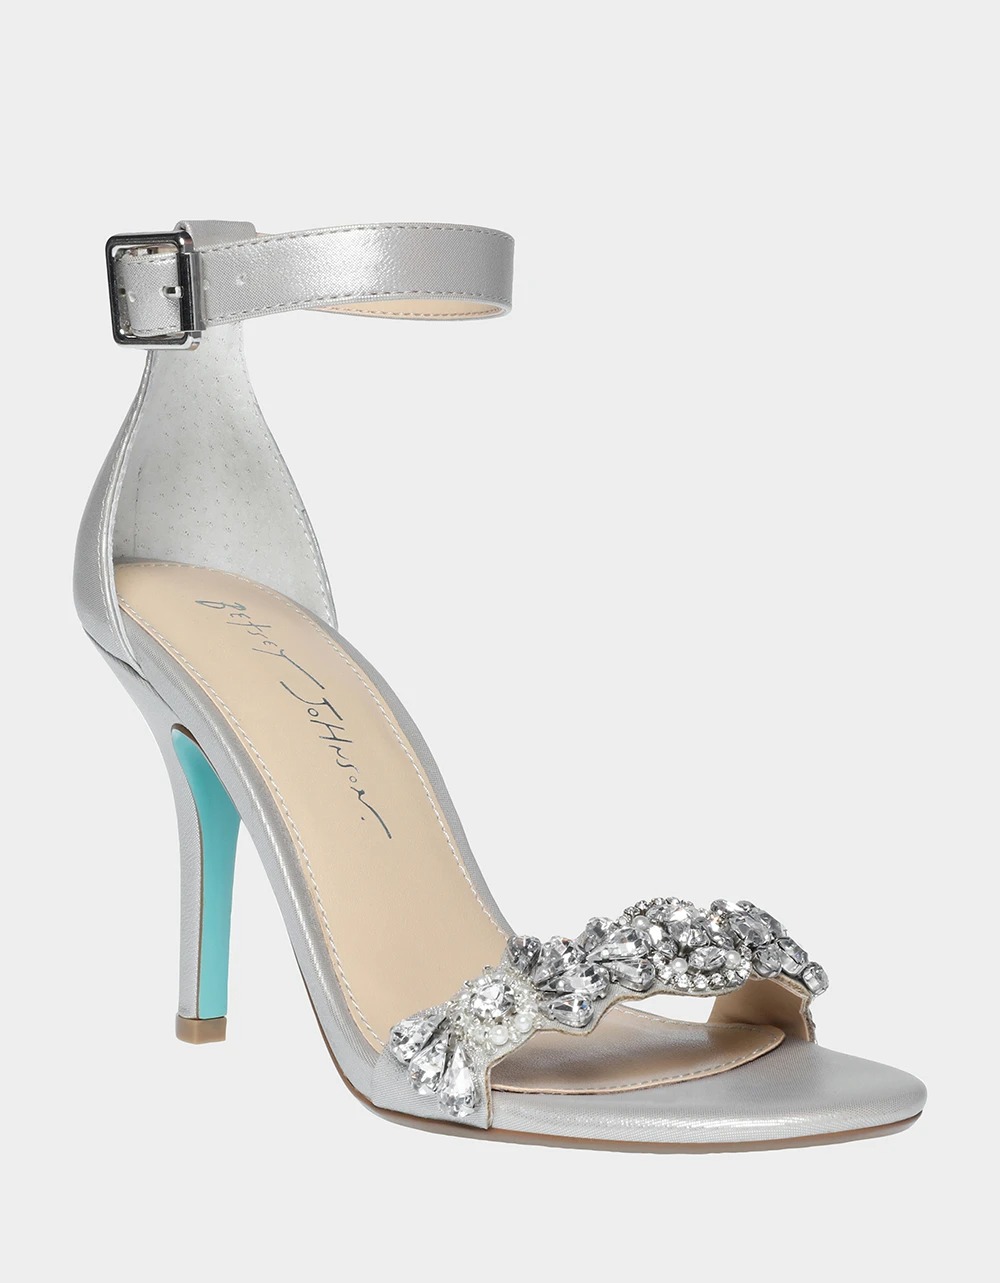 41 Bridesmaid Shoes You’ll Actually Love Wearing (and Rewearing)